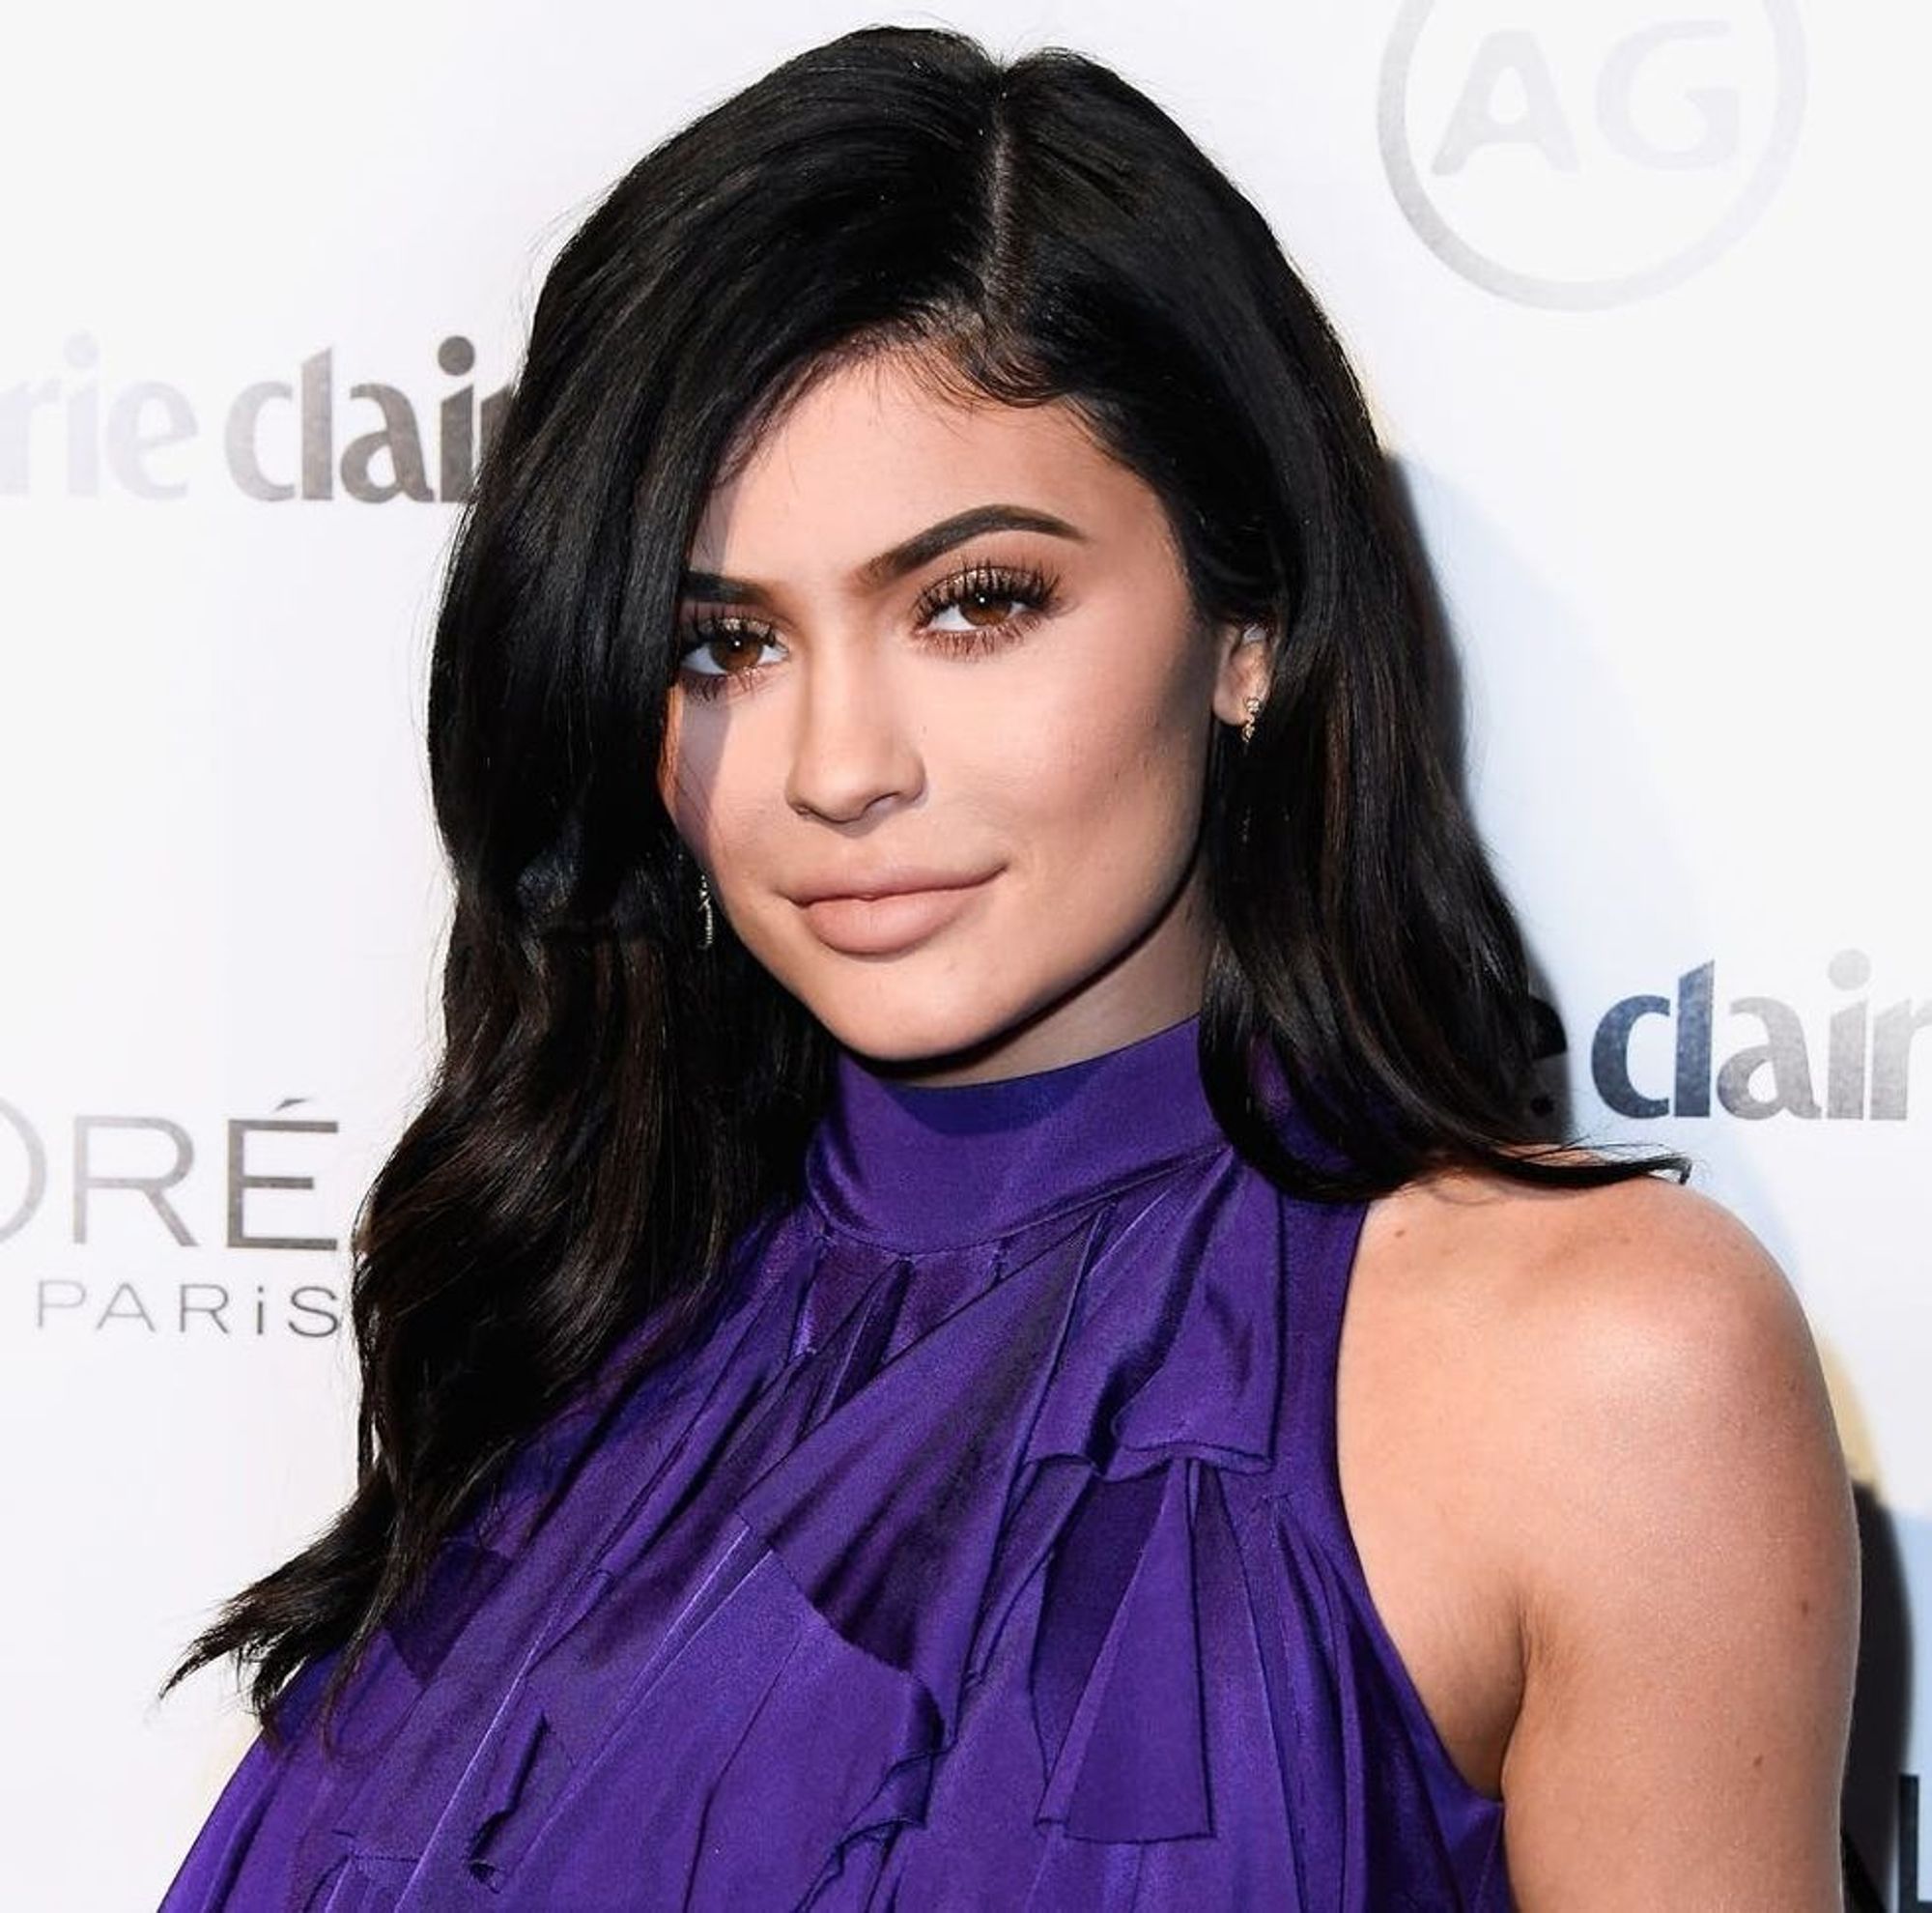 Kylie Jenner Shared New Pics To Celebrate Stormi Turning 1 Month Old